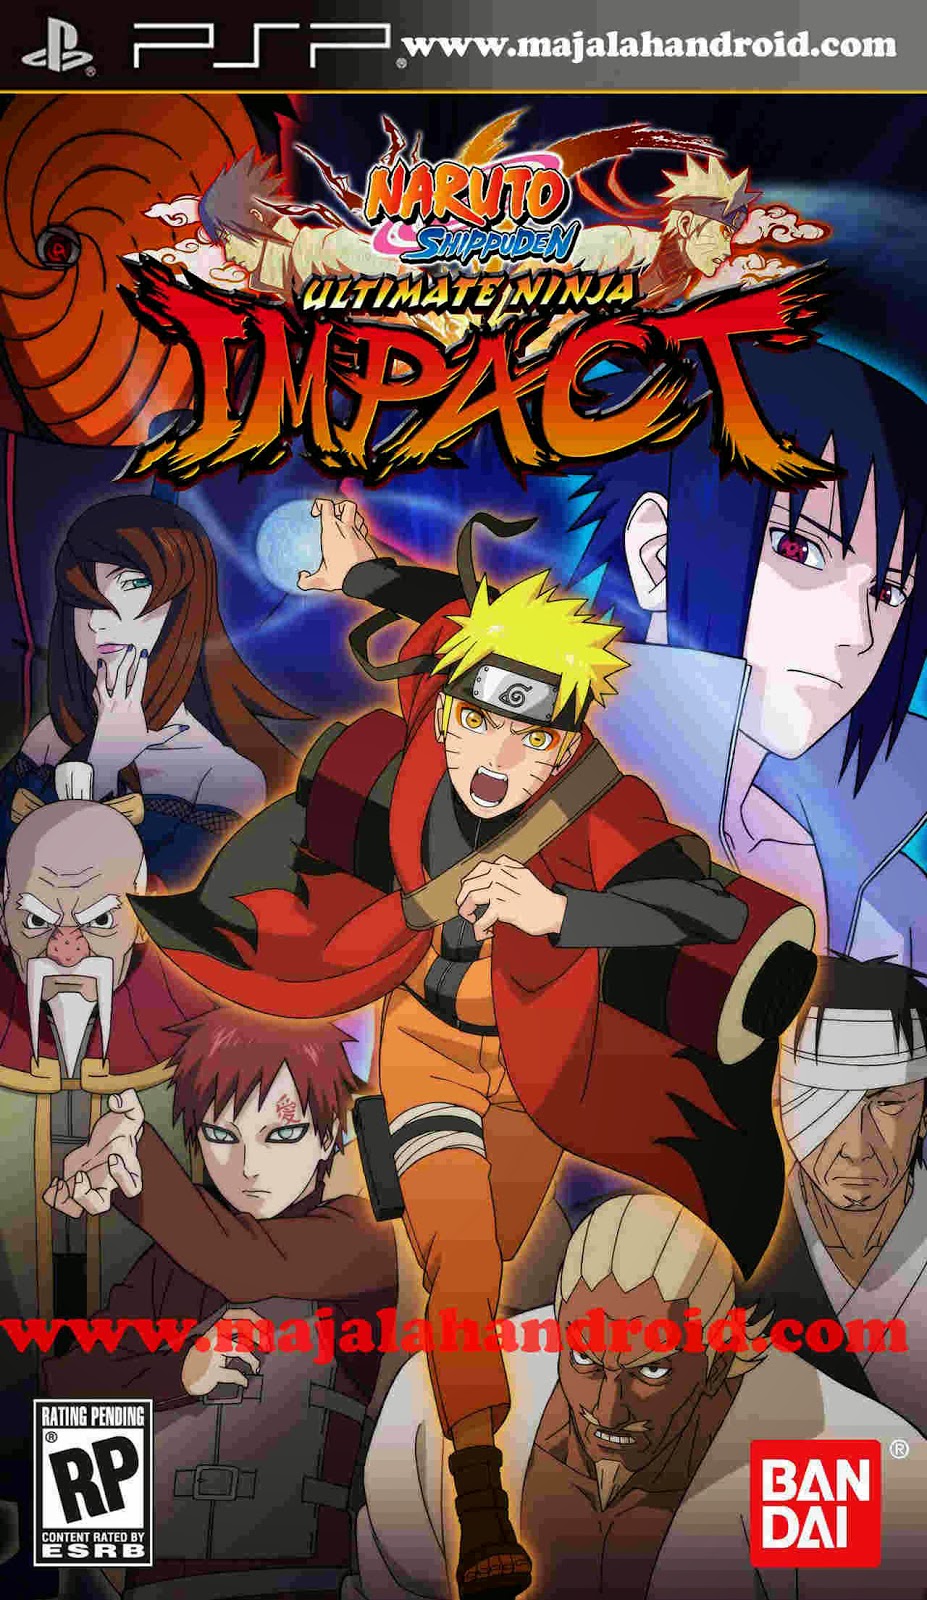 Naruto ppsspp games